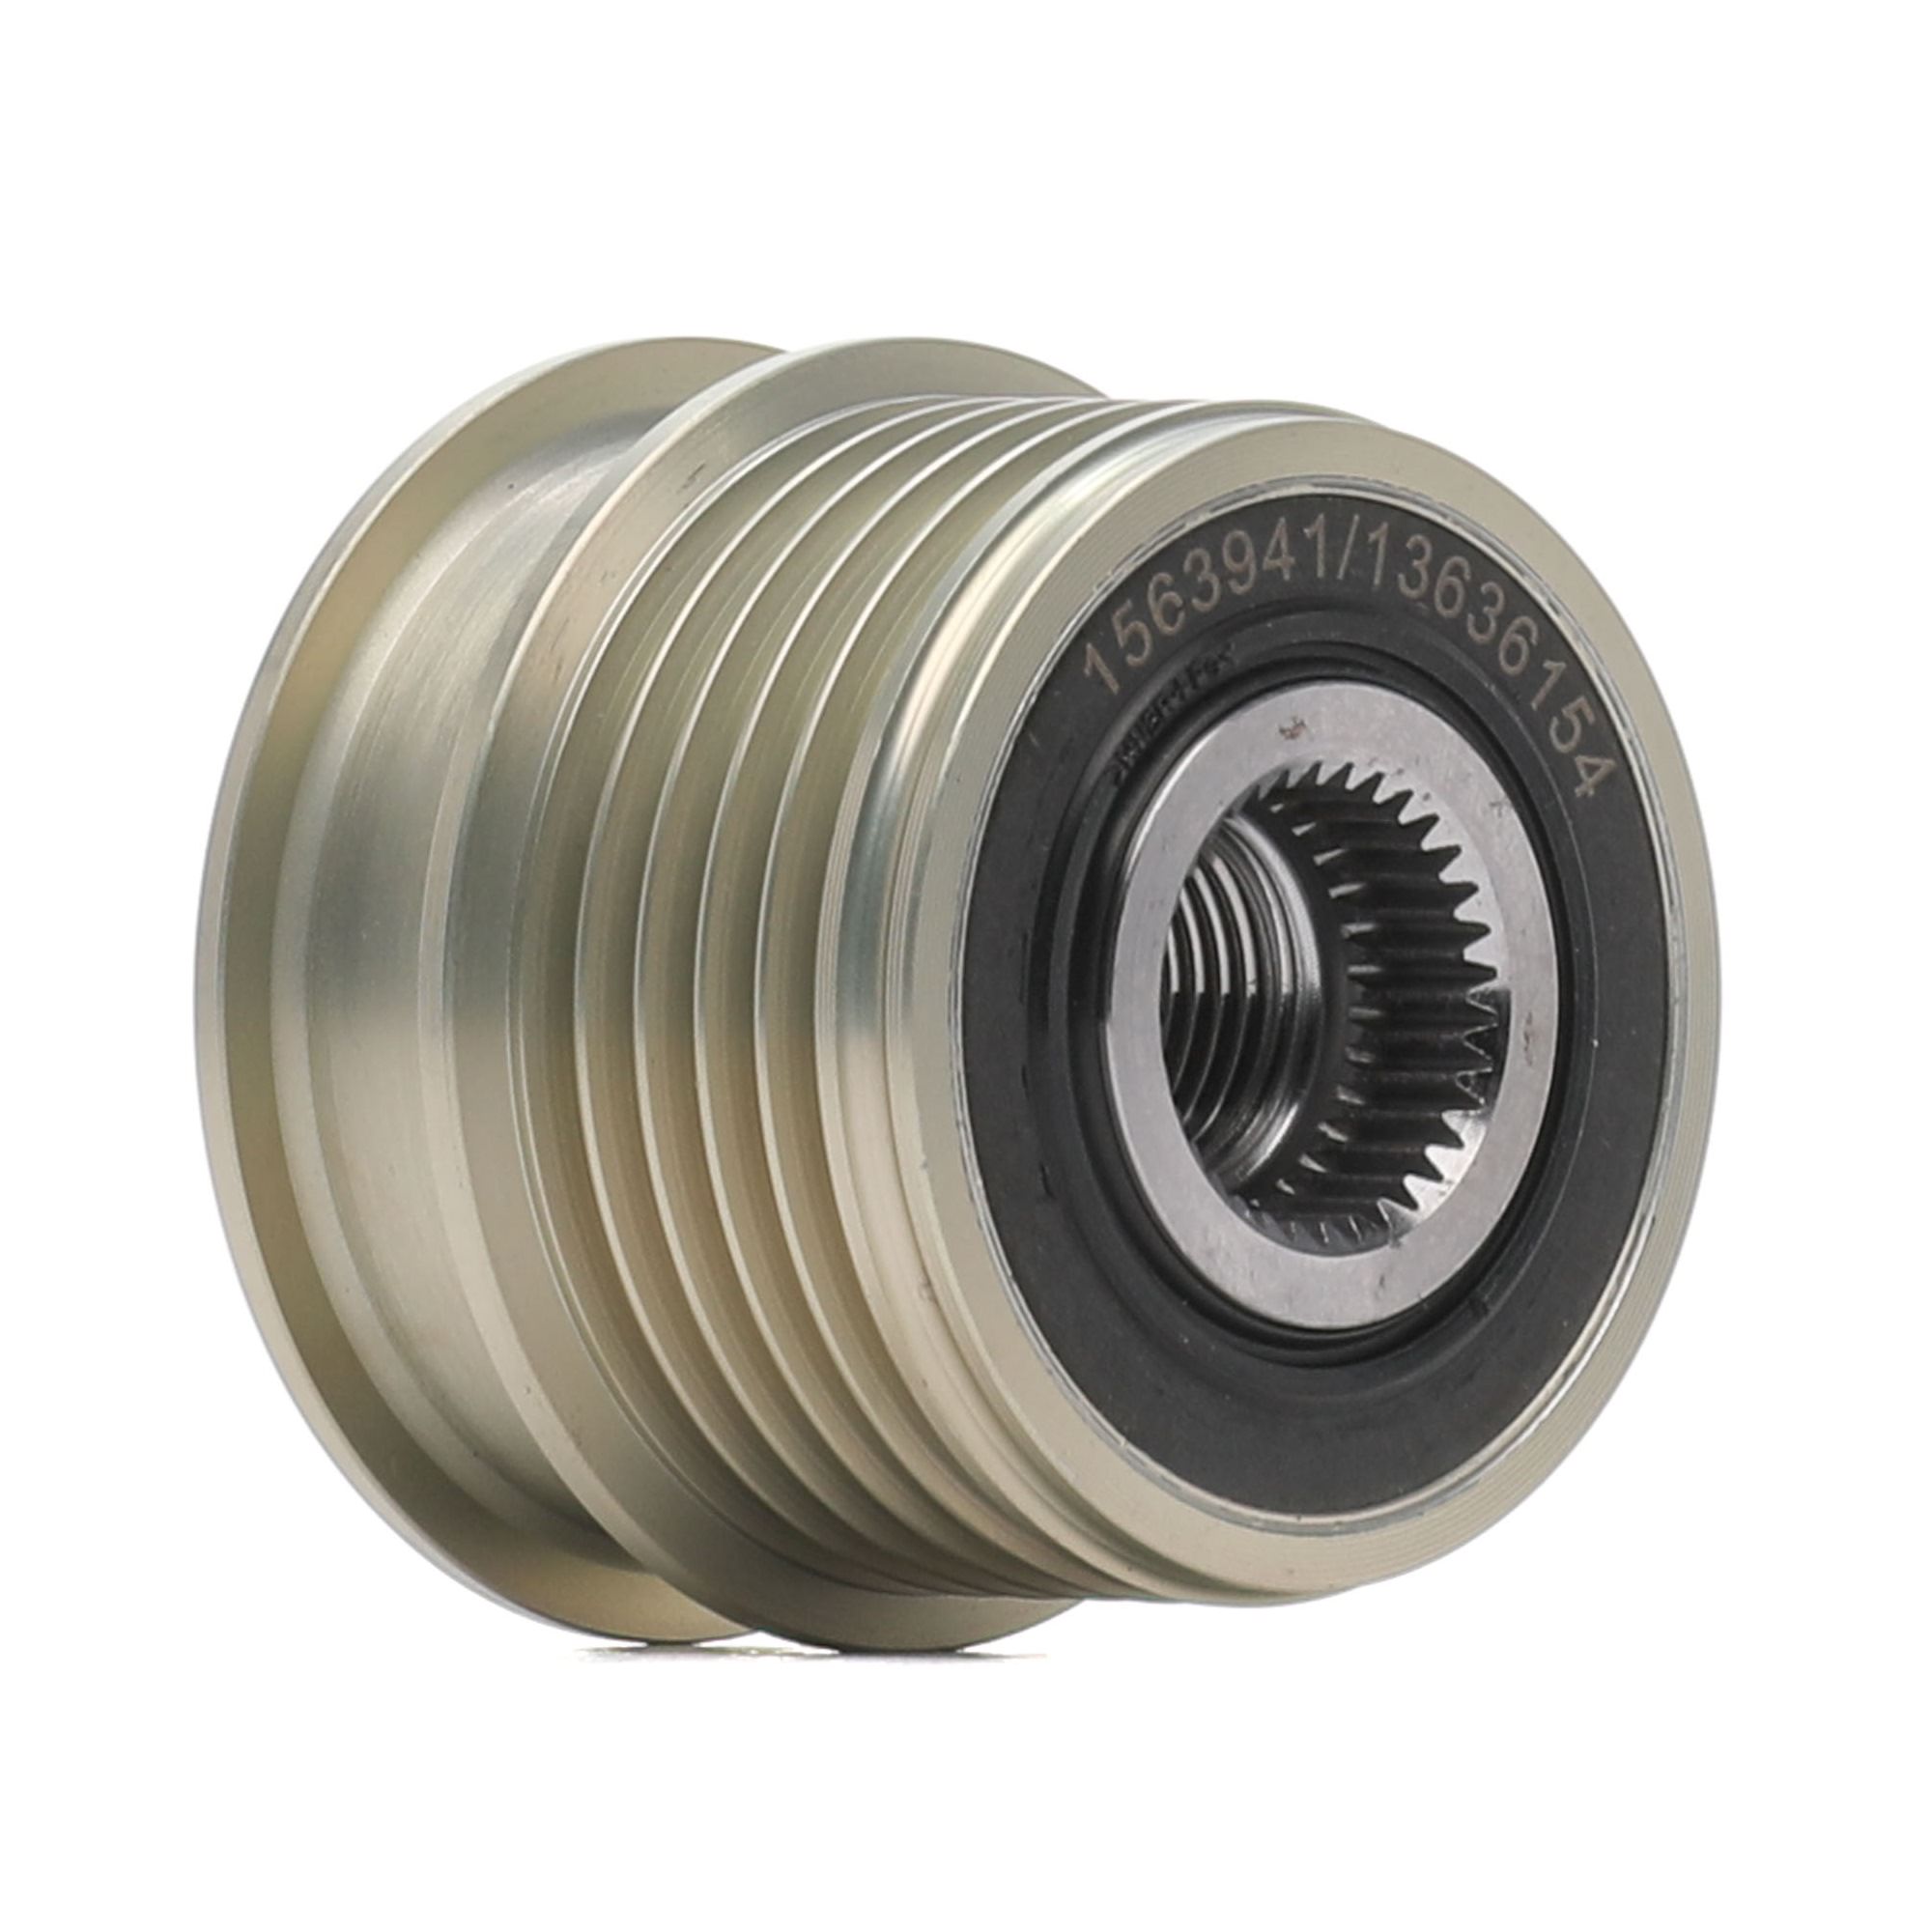 RIDEX 1390F0074 Alternator Freewheel Clutch Width: 44,6mm, Requires special tools for mounting